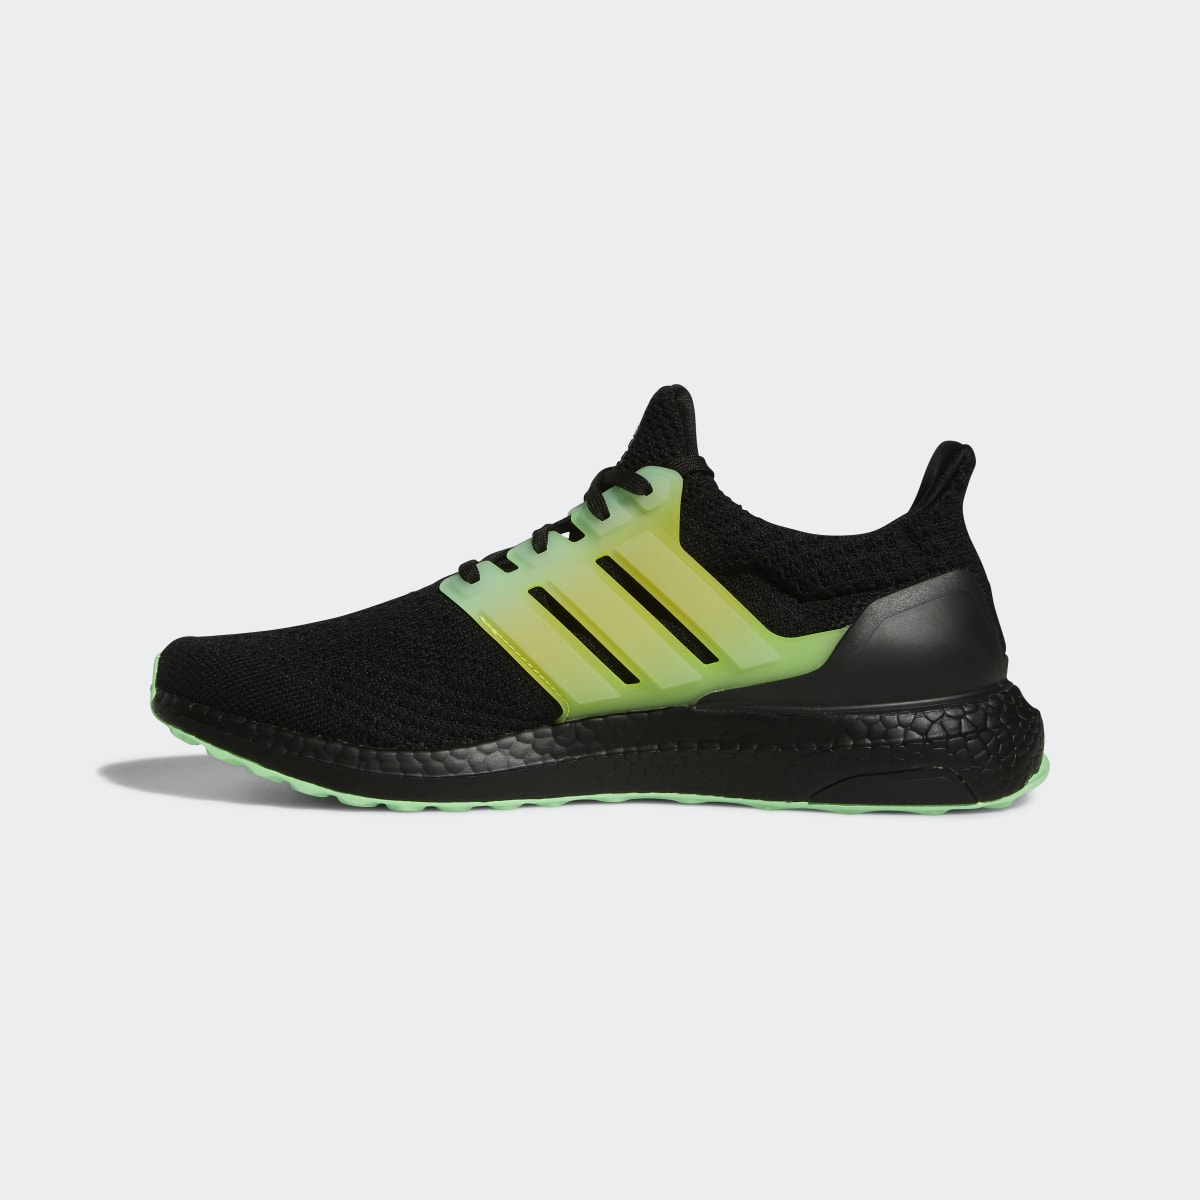 Adidas Ultraboost 5.0 DNA Shoes. 10